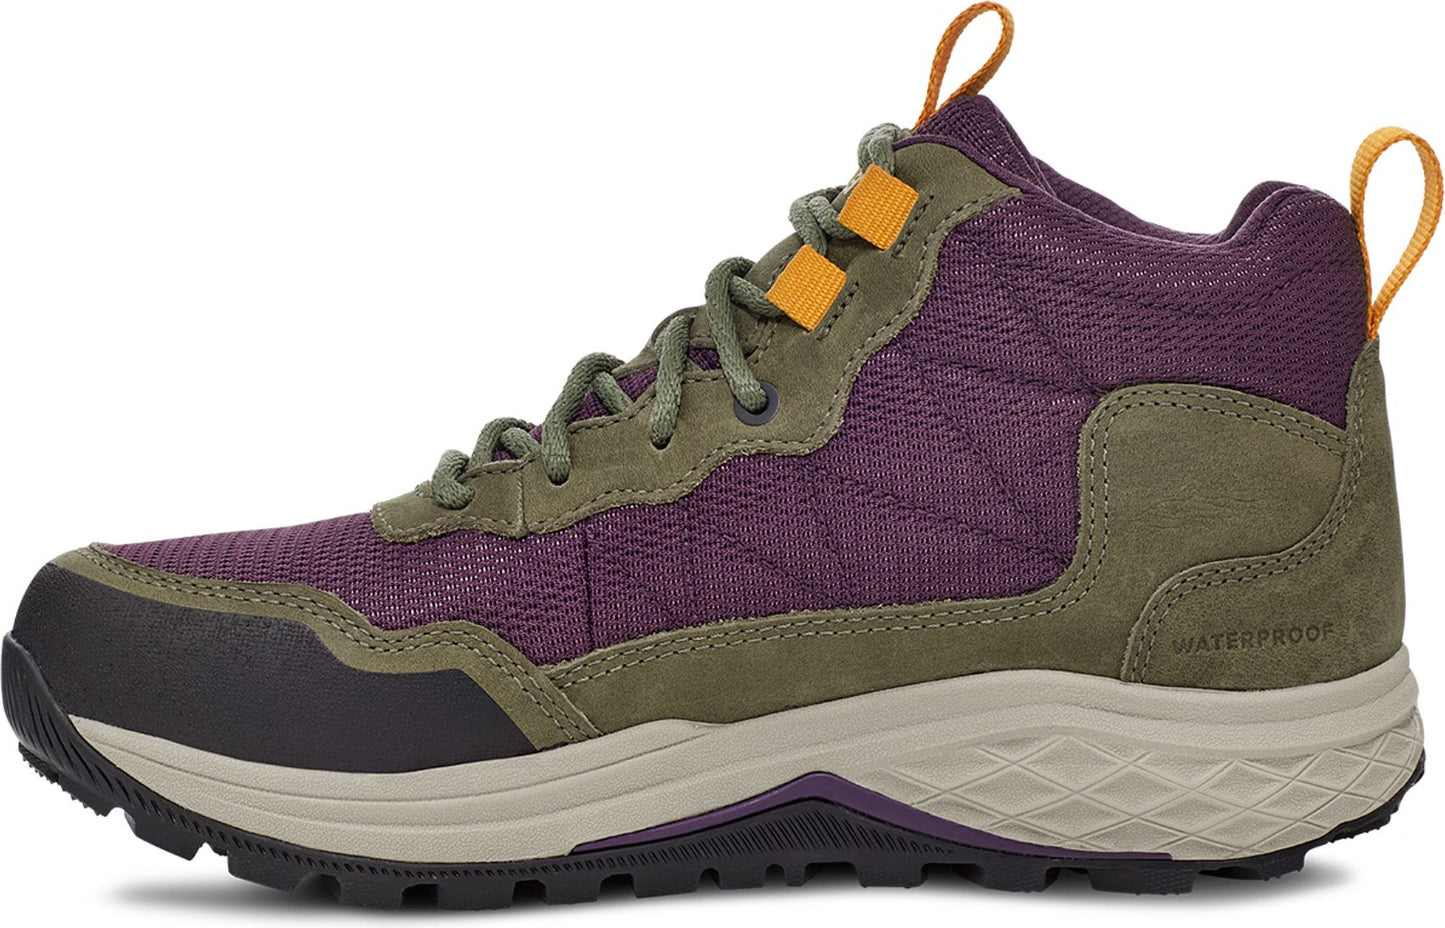 Teva Boots Ridgeview Mid Rp Olive Branch Purple Pennant